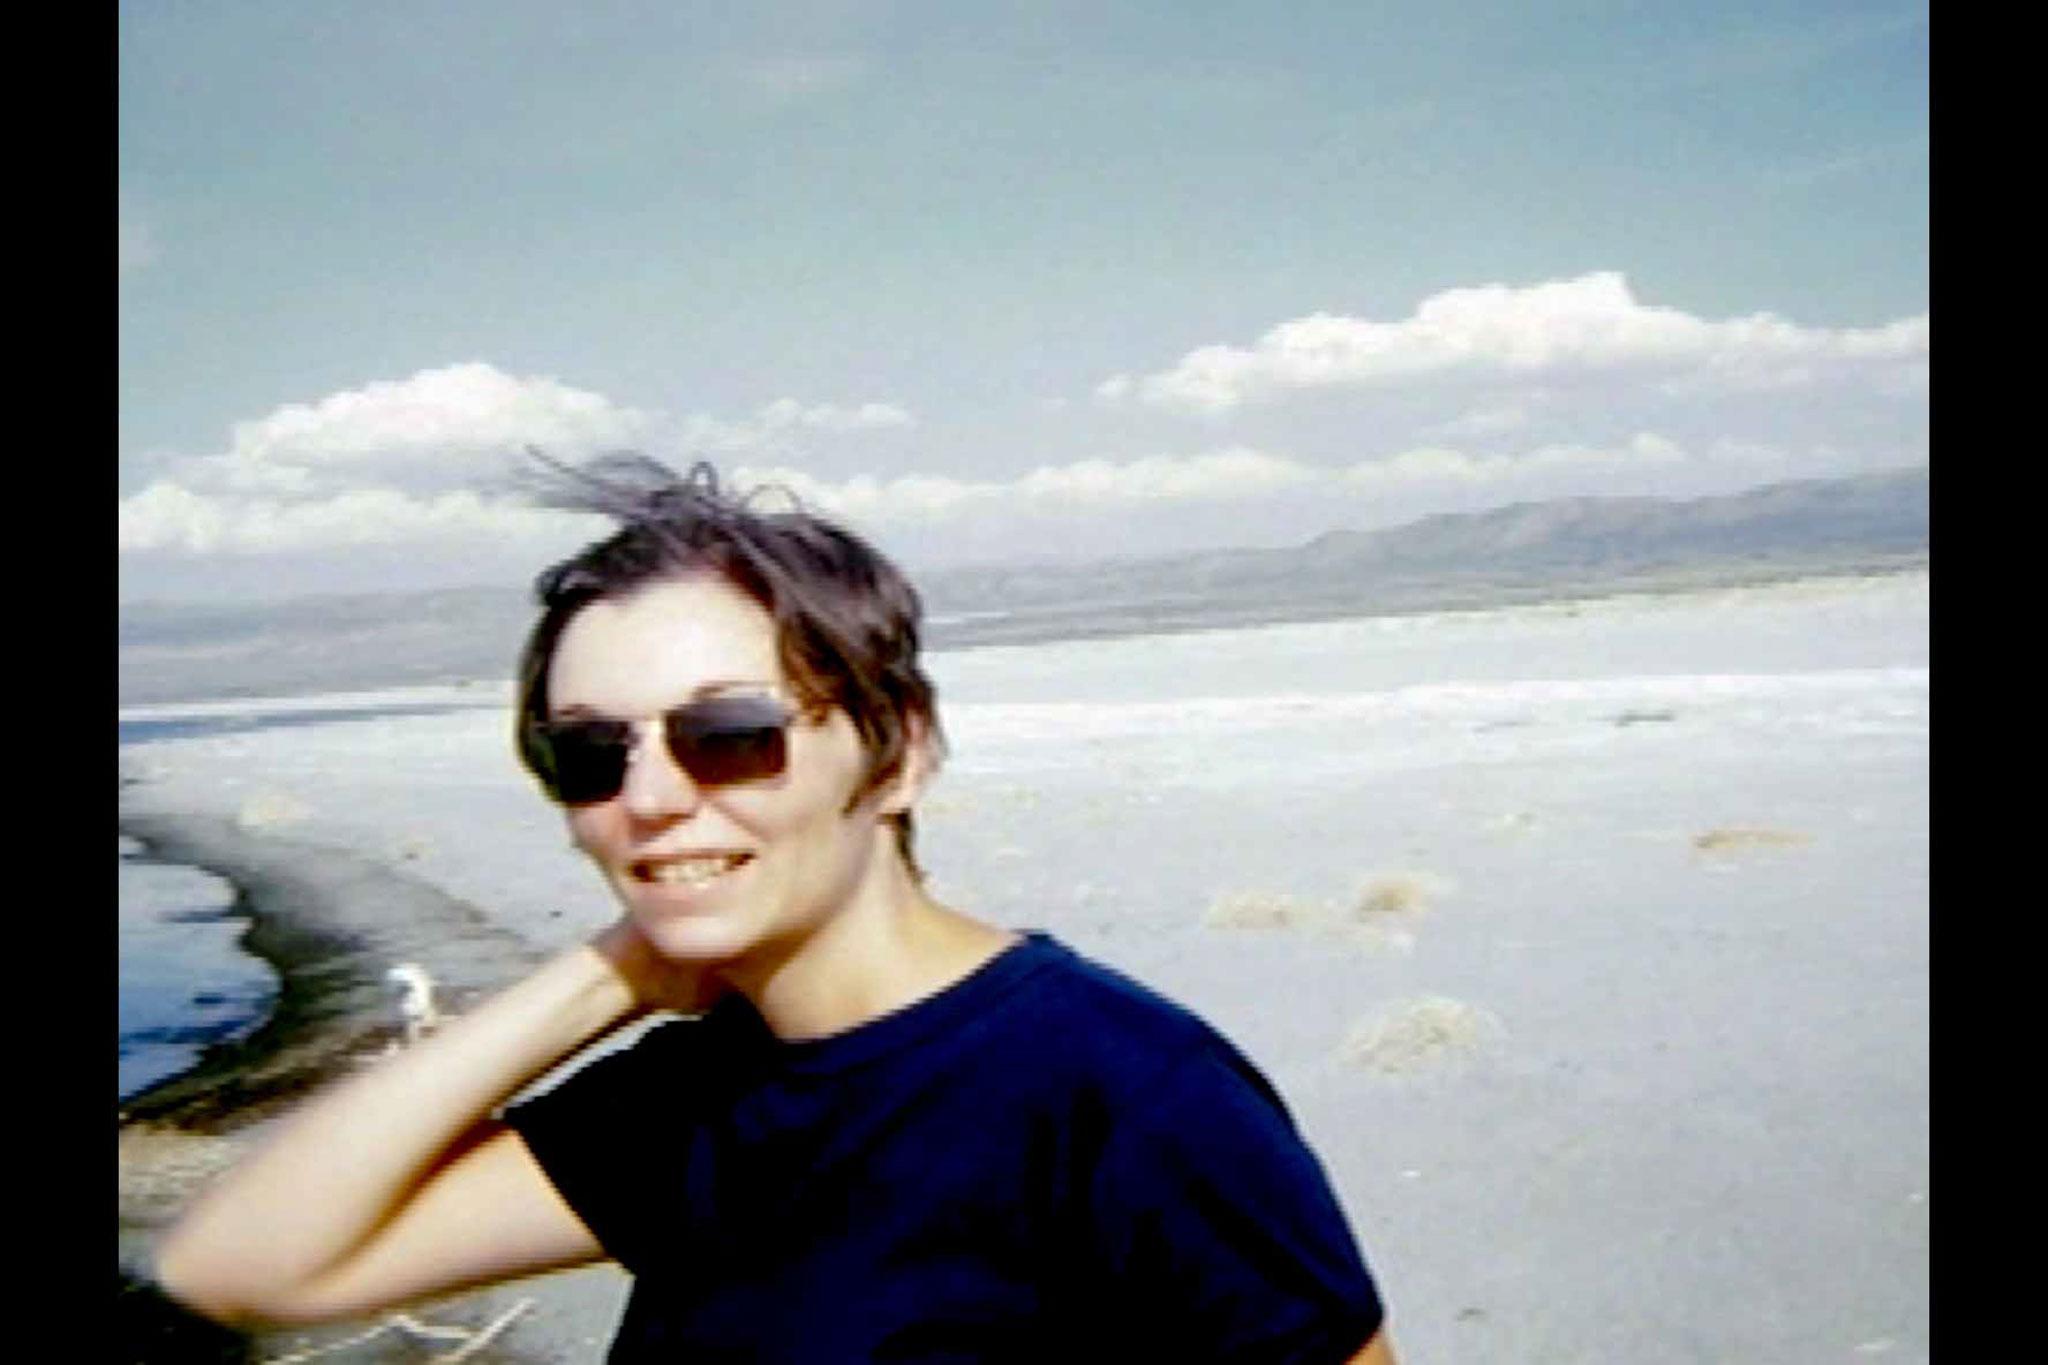 A young woman wearing sunglasses looking at the camera, with blue sky and desert behind her.